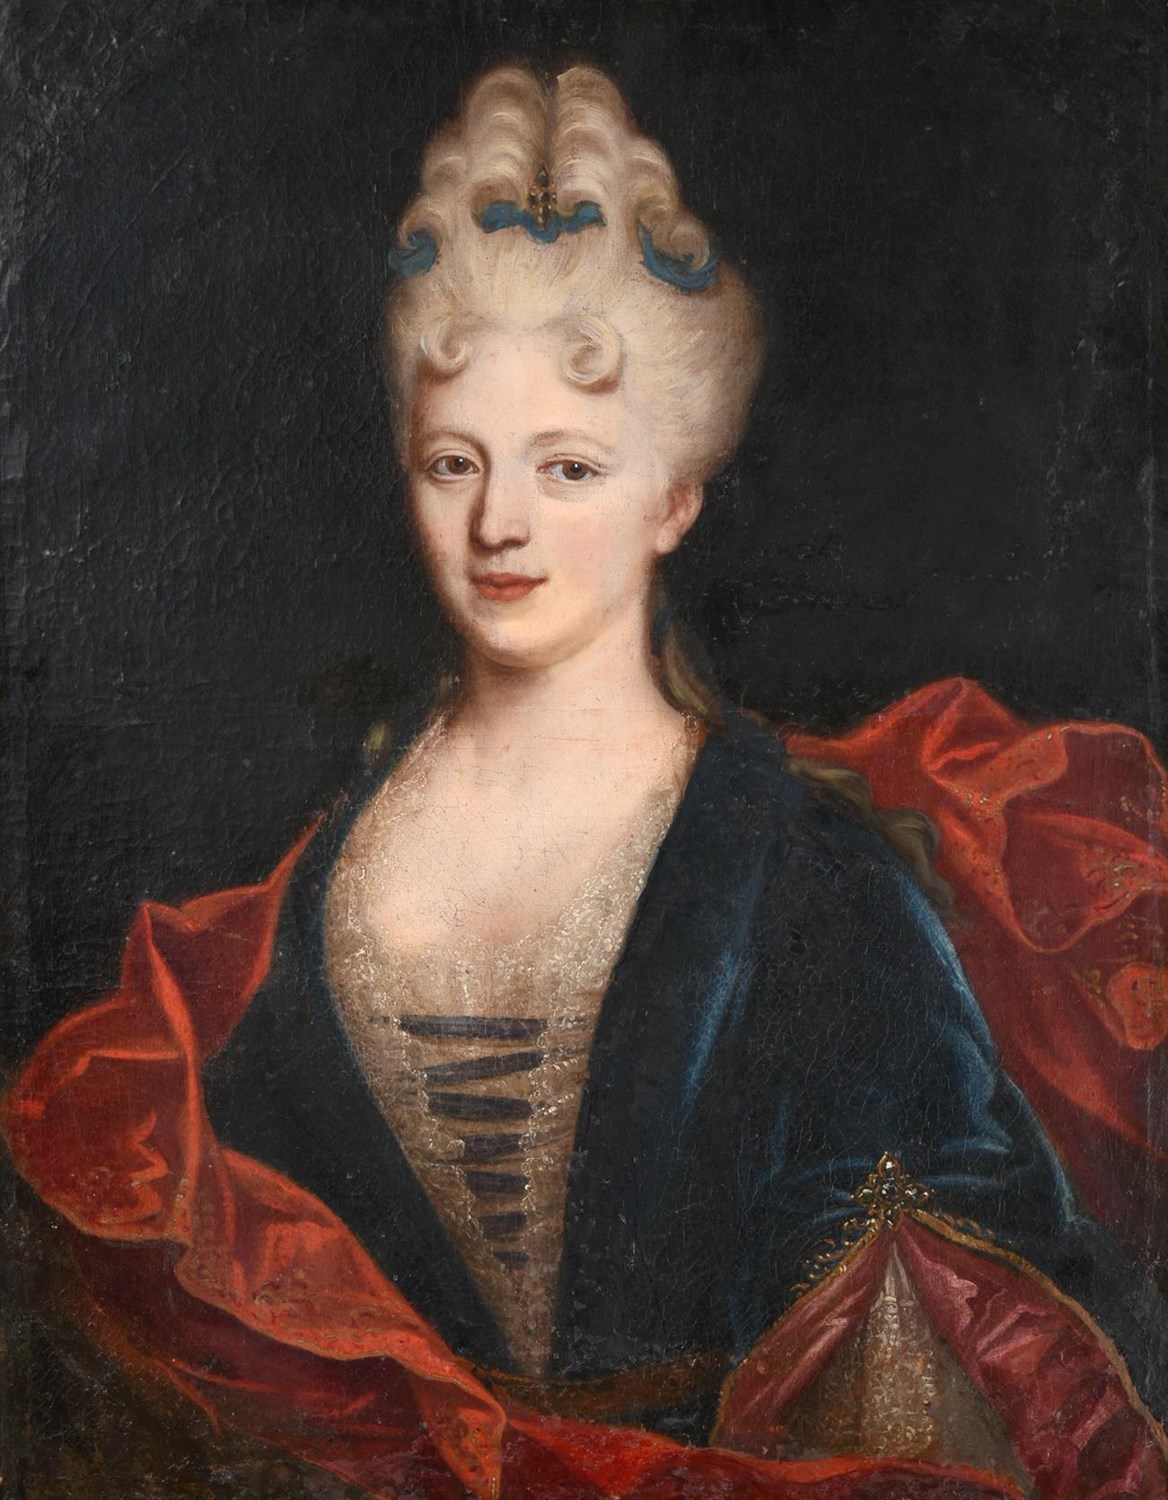 Lot 54 - French School (18th century)   Portrait of a lady, half length, wearing a blue velvet dress trimmed